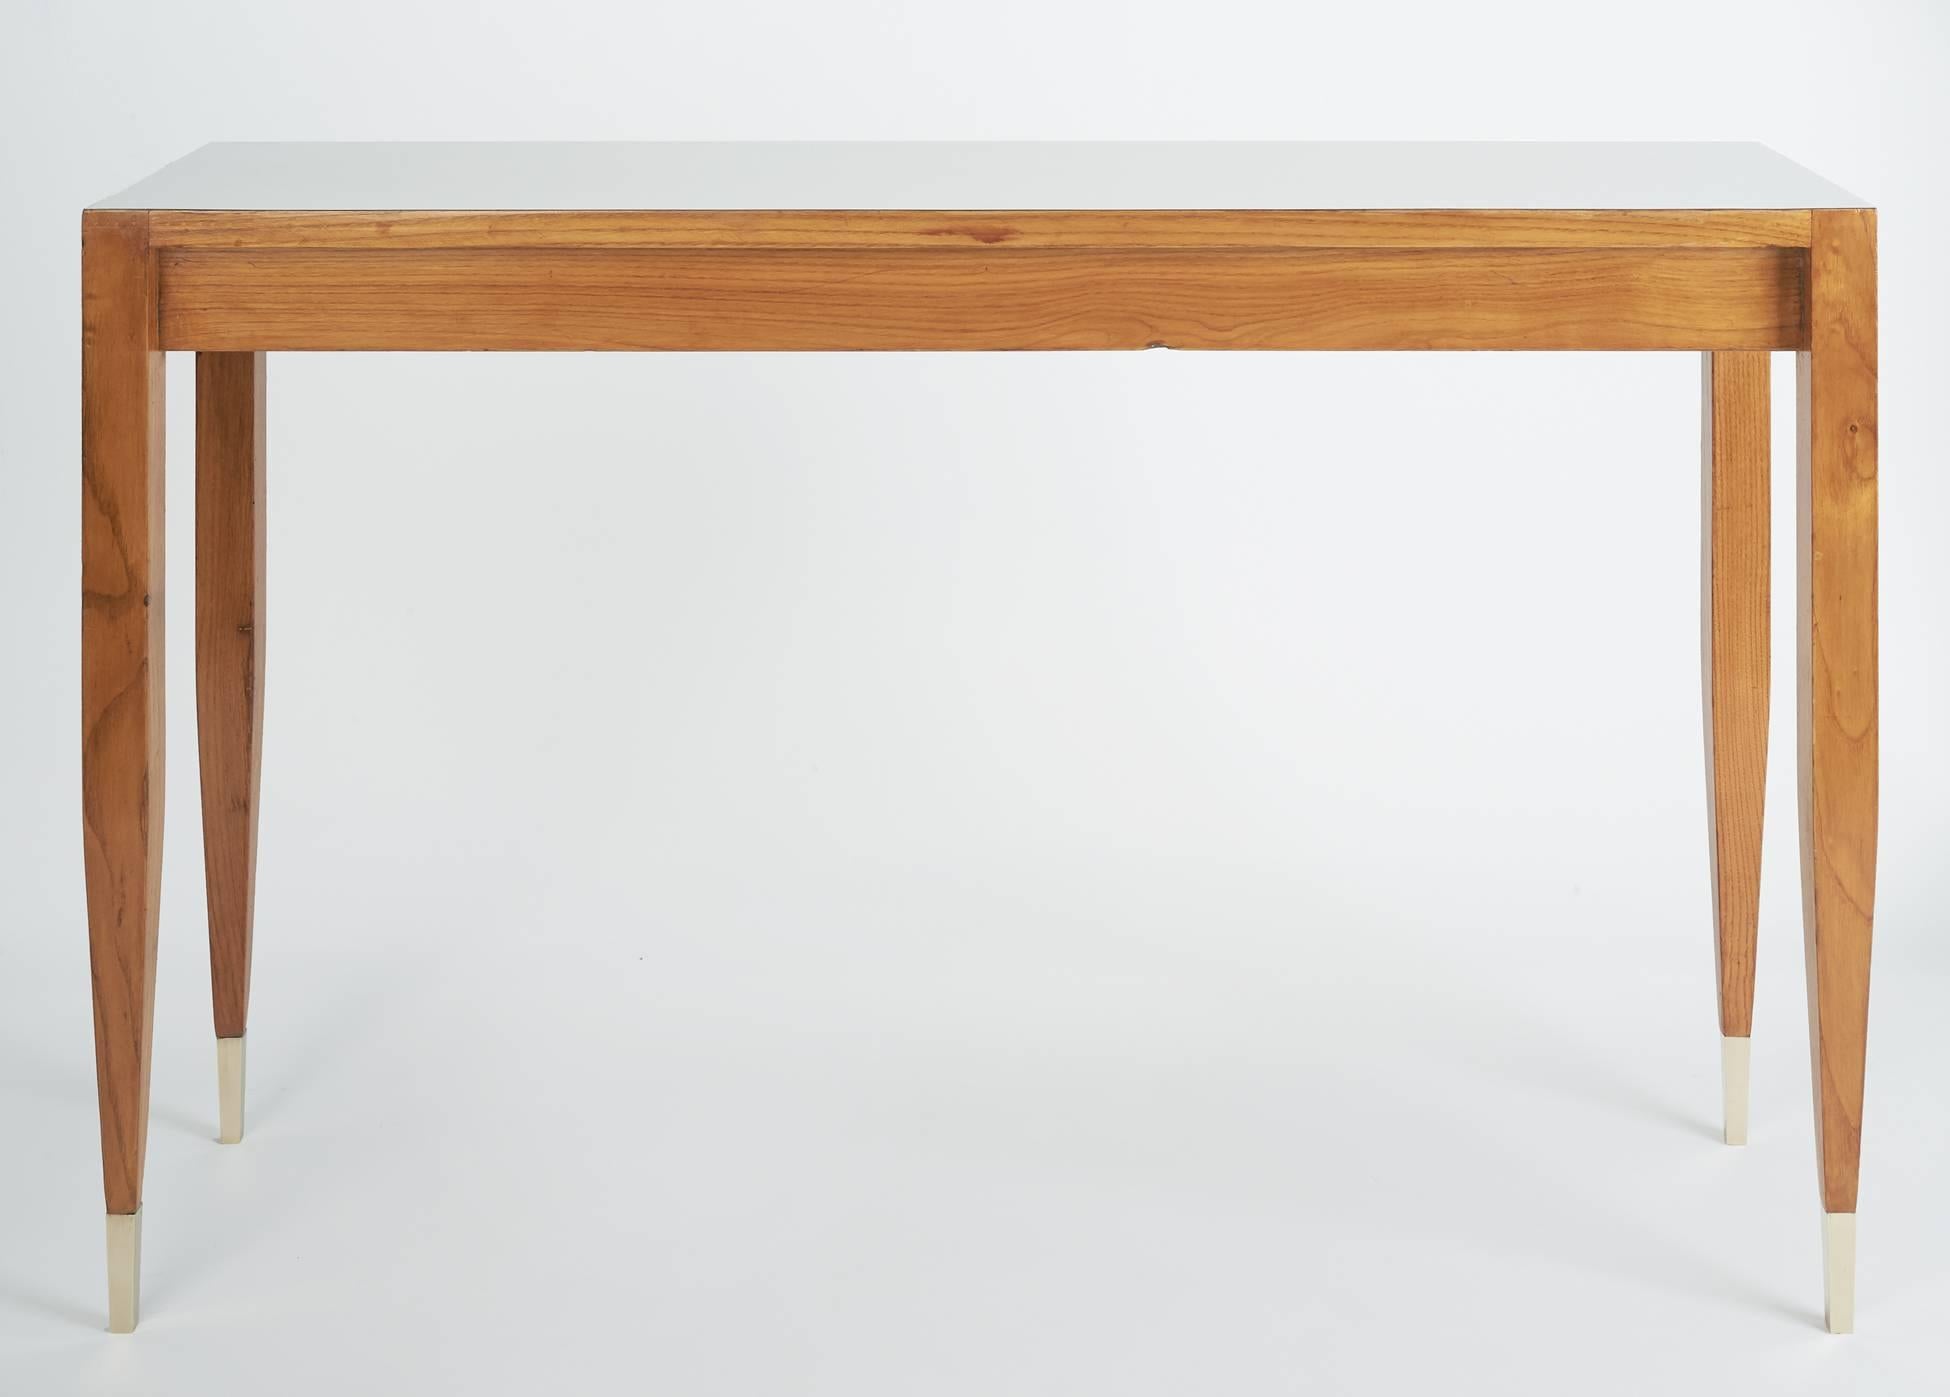 Gio Ponti (1891–1979)
A pure-lined console table with a smartly recessed core and slender, sharply tapered legs by Gio Ponti. In blond ash with brass sabots and an eggshell-colored laminate top, for the Hotel Parco dei Principi. At once functional